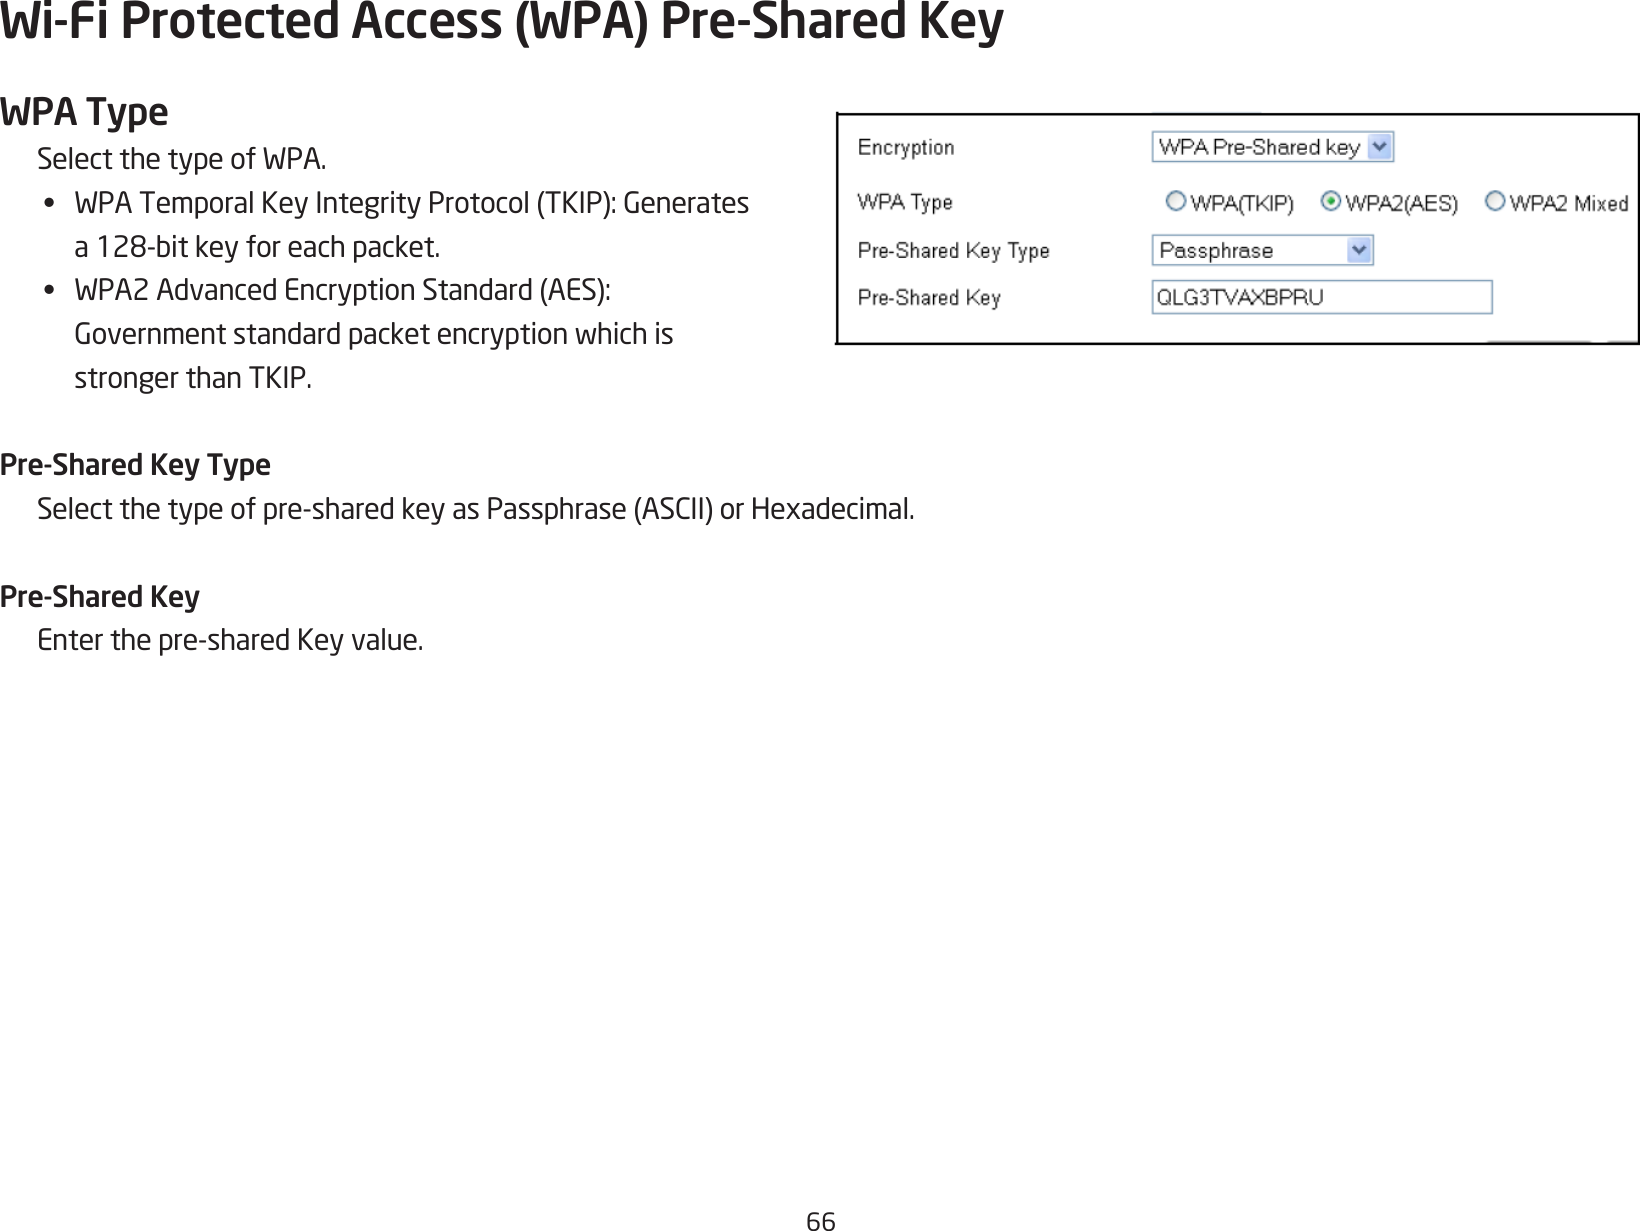 66Wi-Fi Protected Access (WPA) Pre-Shared KeyWPA TypeSelectthetypeofWPA.• WPATemporalKeyIntegrityProtocol(TKIP):Generates a128-bitkeyforeachpacket.• WPA2AdvancedEncryptionStandard(AES): Governmentstandardpacketencryptionwhichis  stronger than TKIP.Pre-Shared Key TypeSelectthetypeofpre-sharedkeyasPassphrase(ASCII)orHexadecimal.Pre-Shared KeyEnterthepre-sharedKeyvalue.